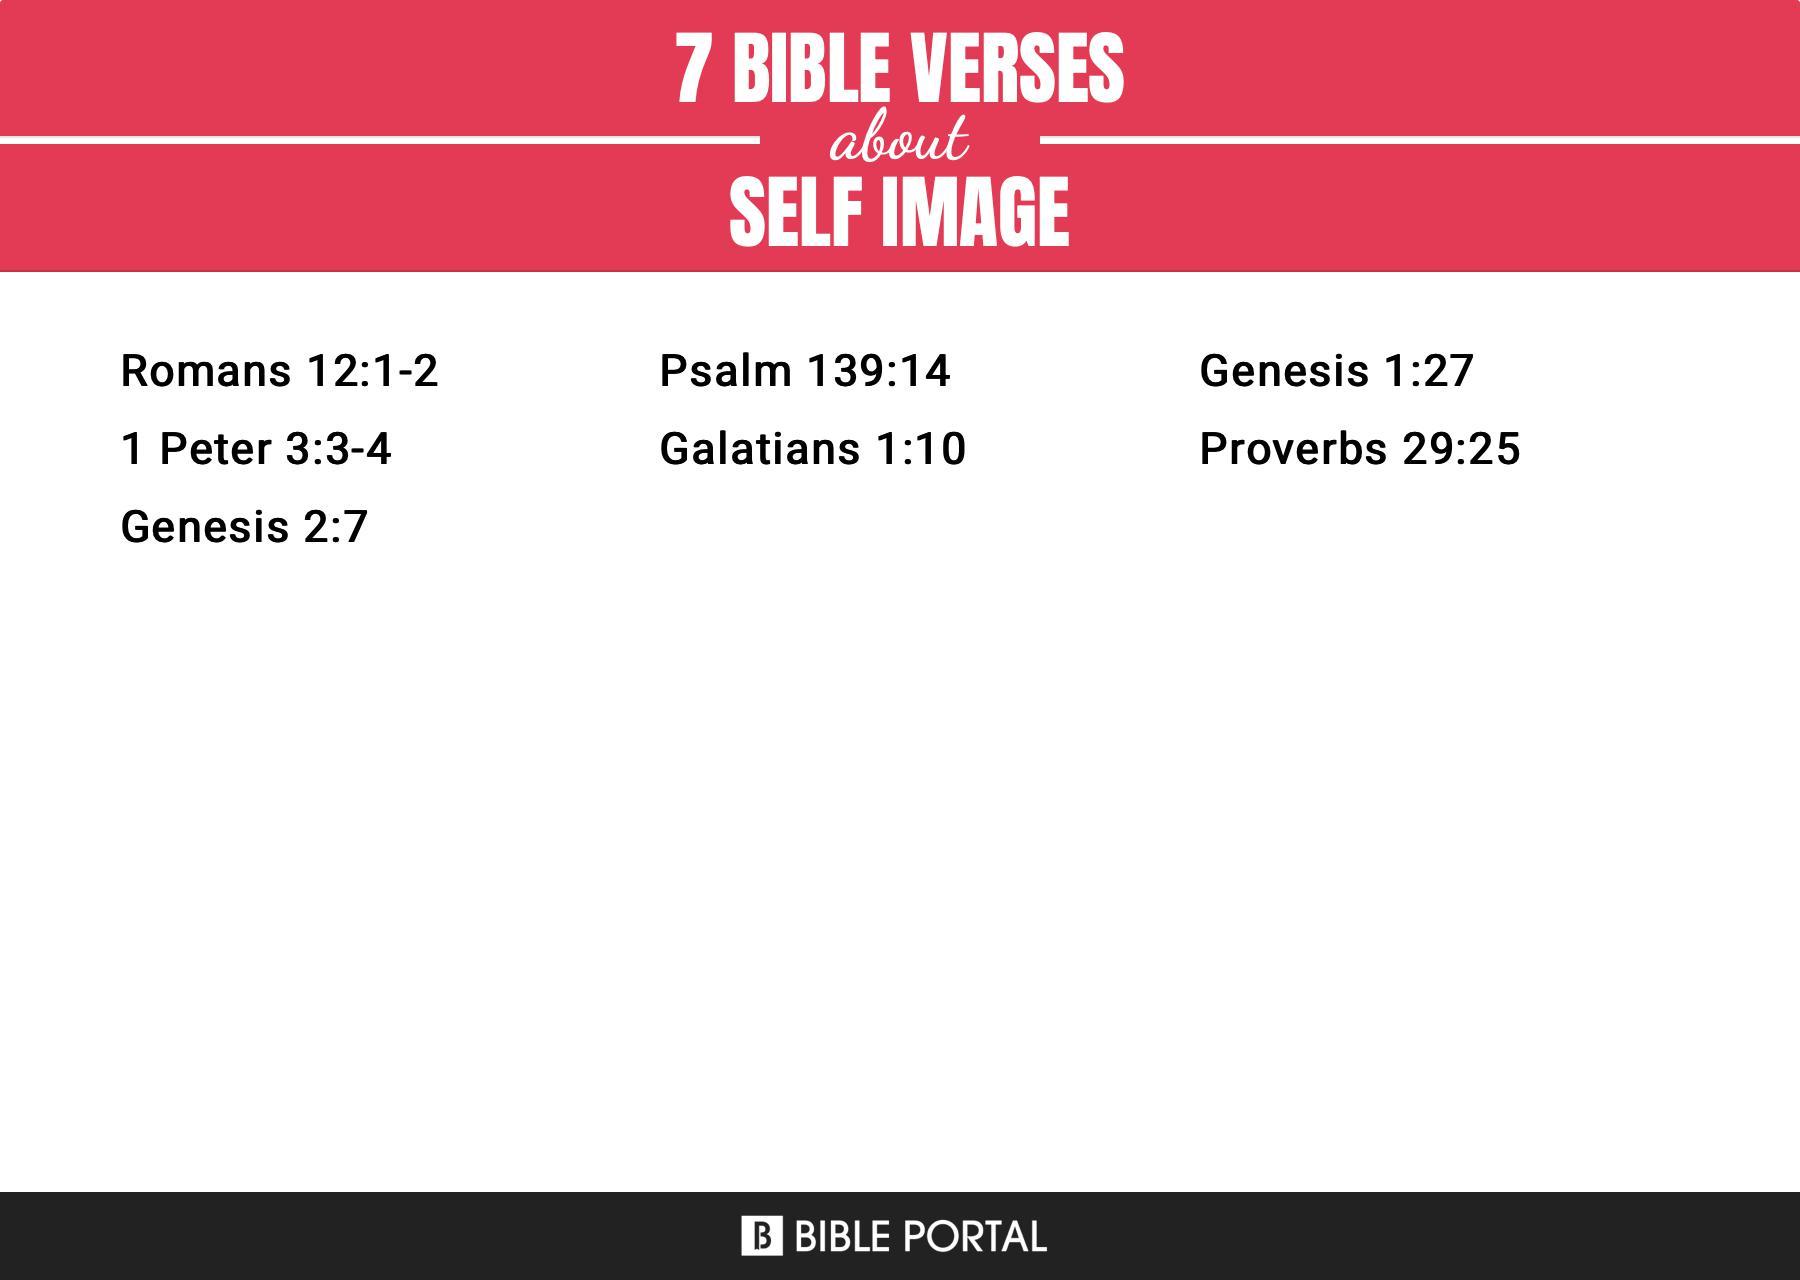 83 Bible Verses about Self-image